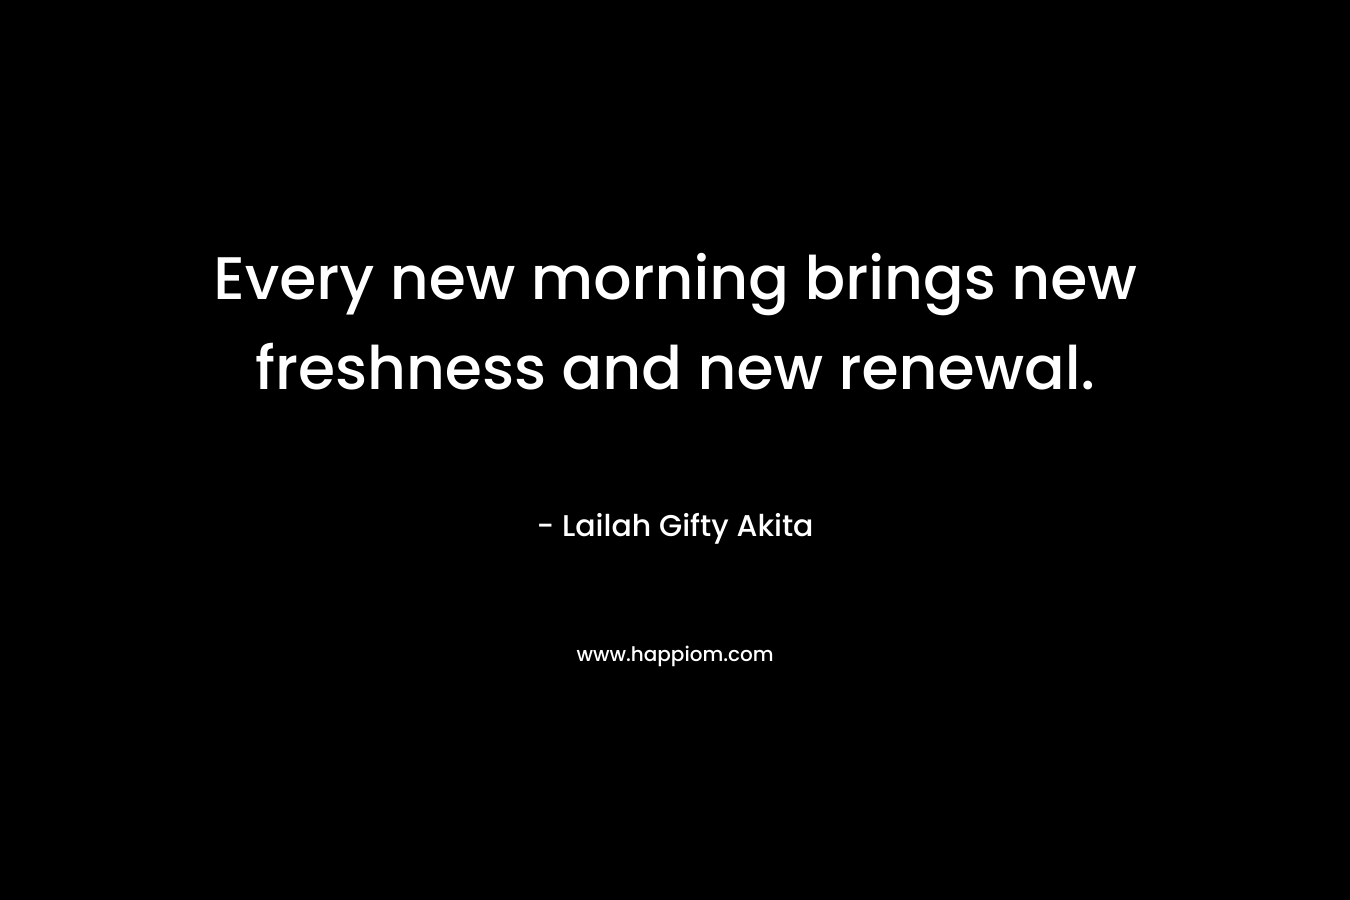 Every new morning brings new freshness and new renewal.